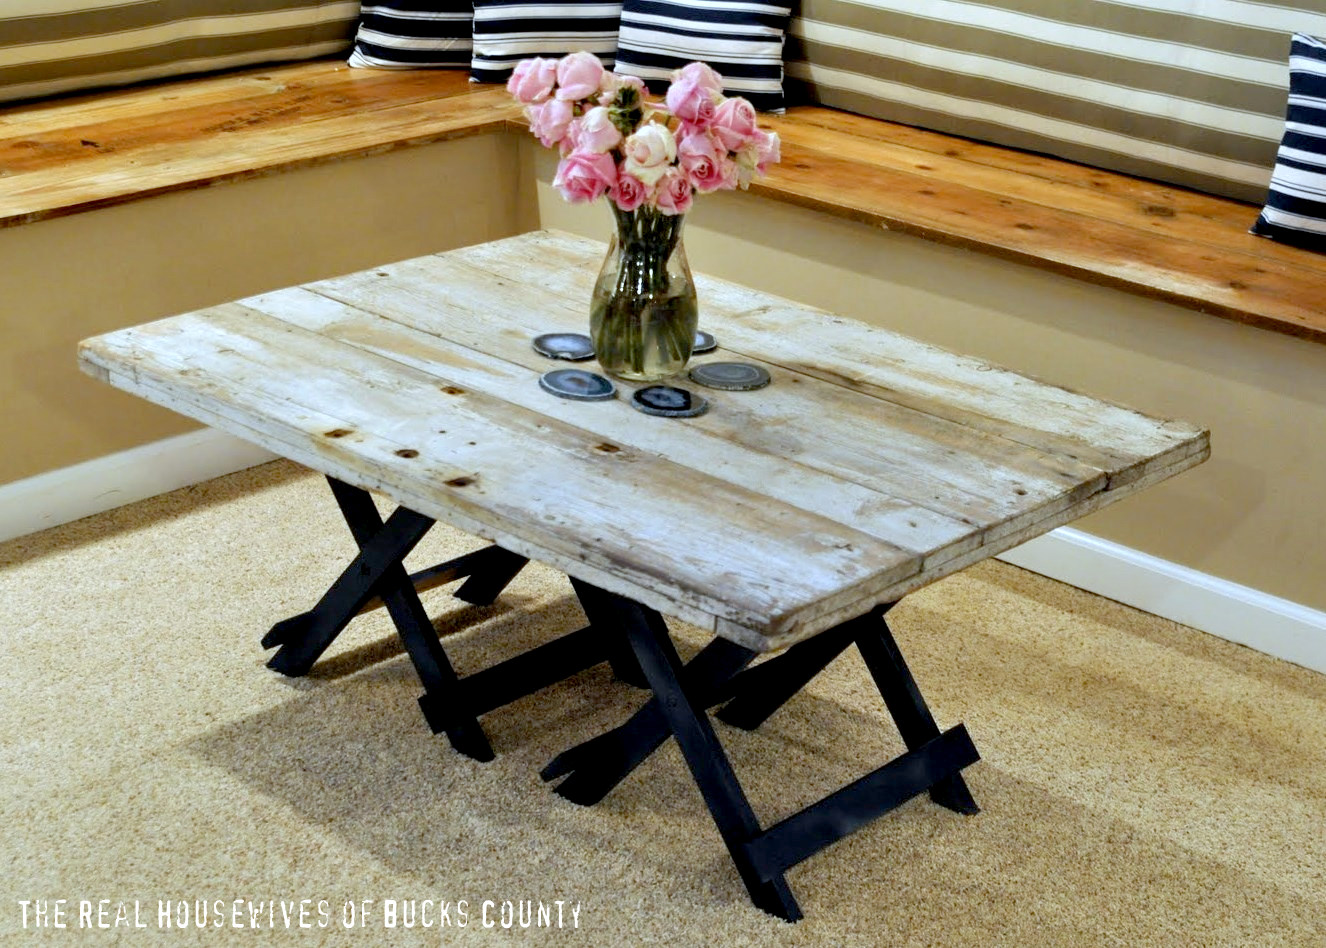  this table inspires you to bring a little barn wood into your homes